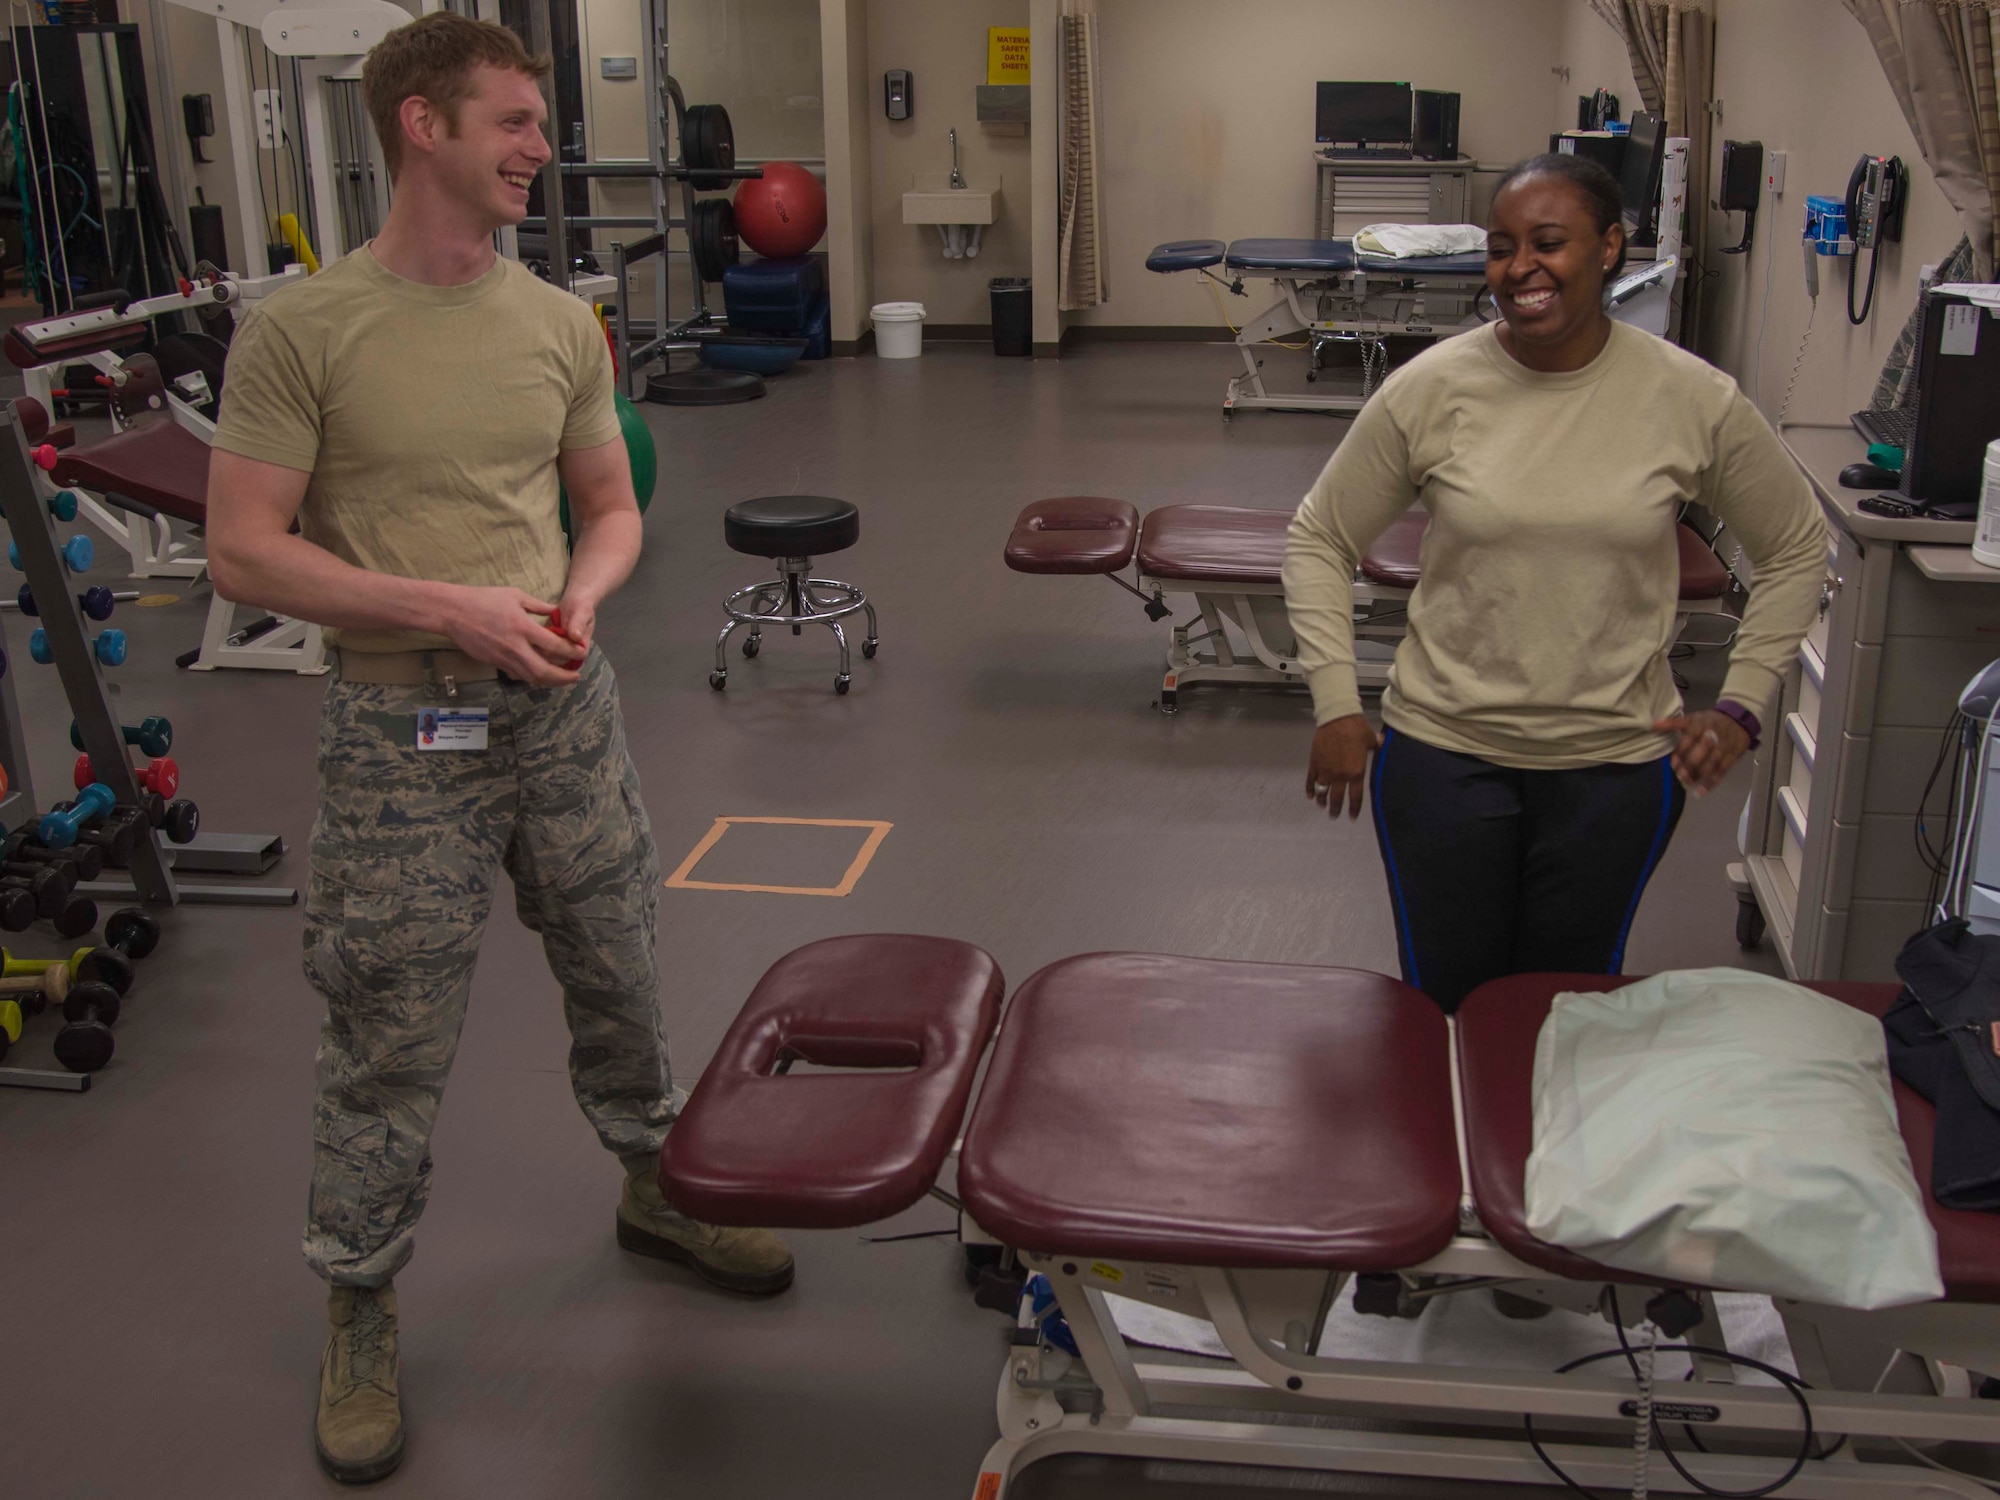 Staff Sgt. Kivynn Pabst, left, 779th Medical Group physical medicine technician, talks with Master Sgt. Christina Chislom, Malcolm Grow Medical Center patient, as they move onto the next exercise during a physical therapy appointment at Joint Base Andrews, Md., Feb. 2, 2017. Technicians build a bond of trust with their patients to help them on the road of recovery. (U.S. Air Force photo by Airman 1st Class Valentina Lopez)